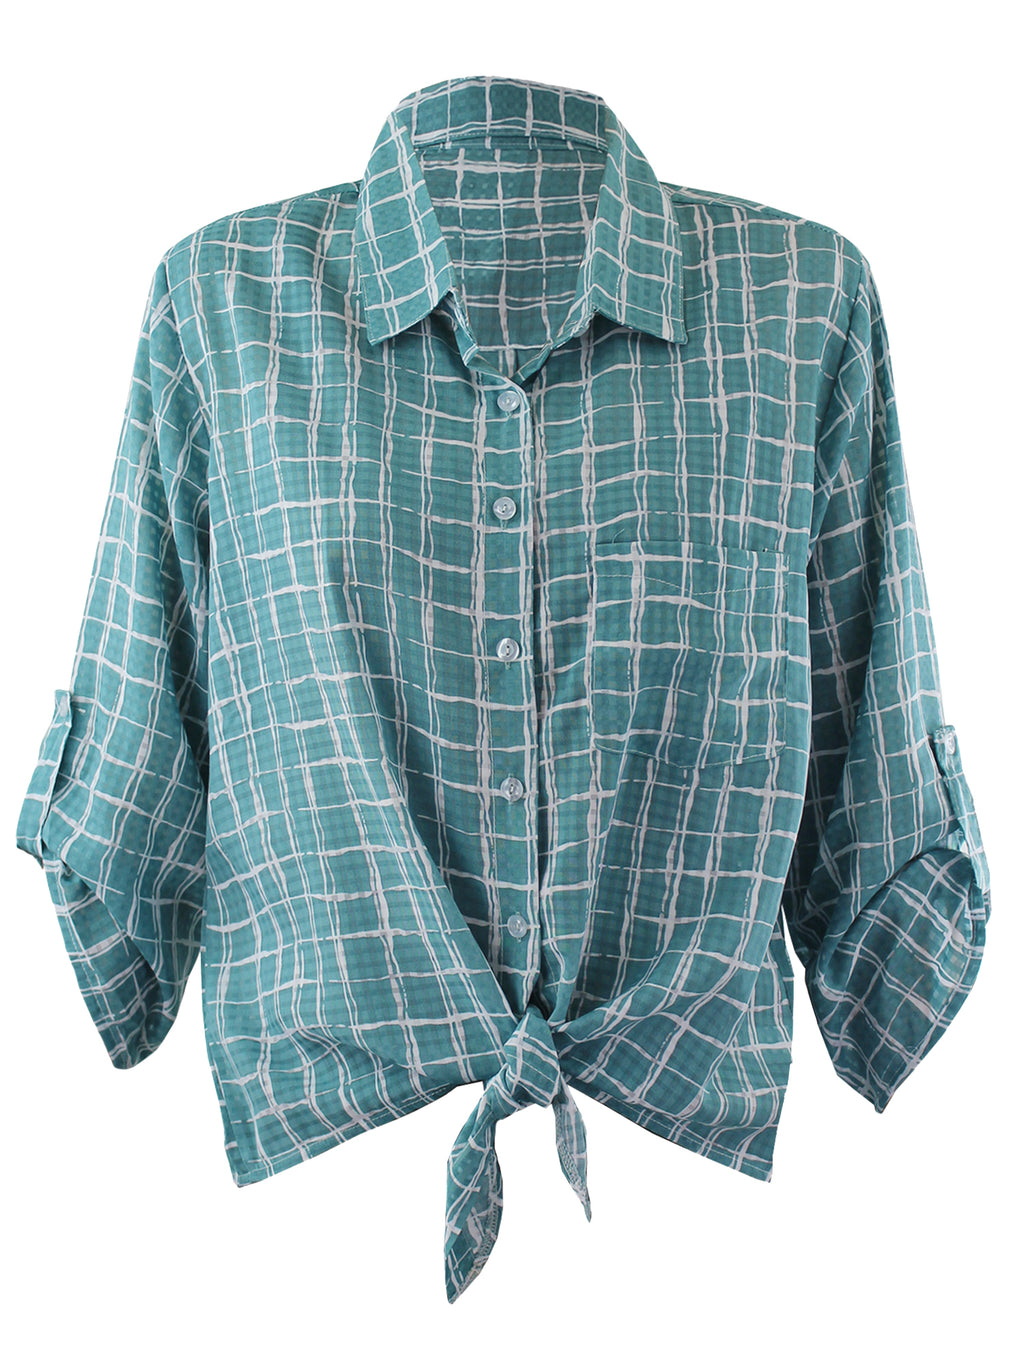 Teal & White Womens Tied Front Button Down Blouse